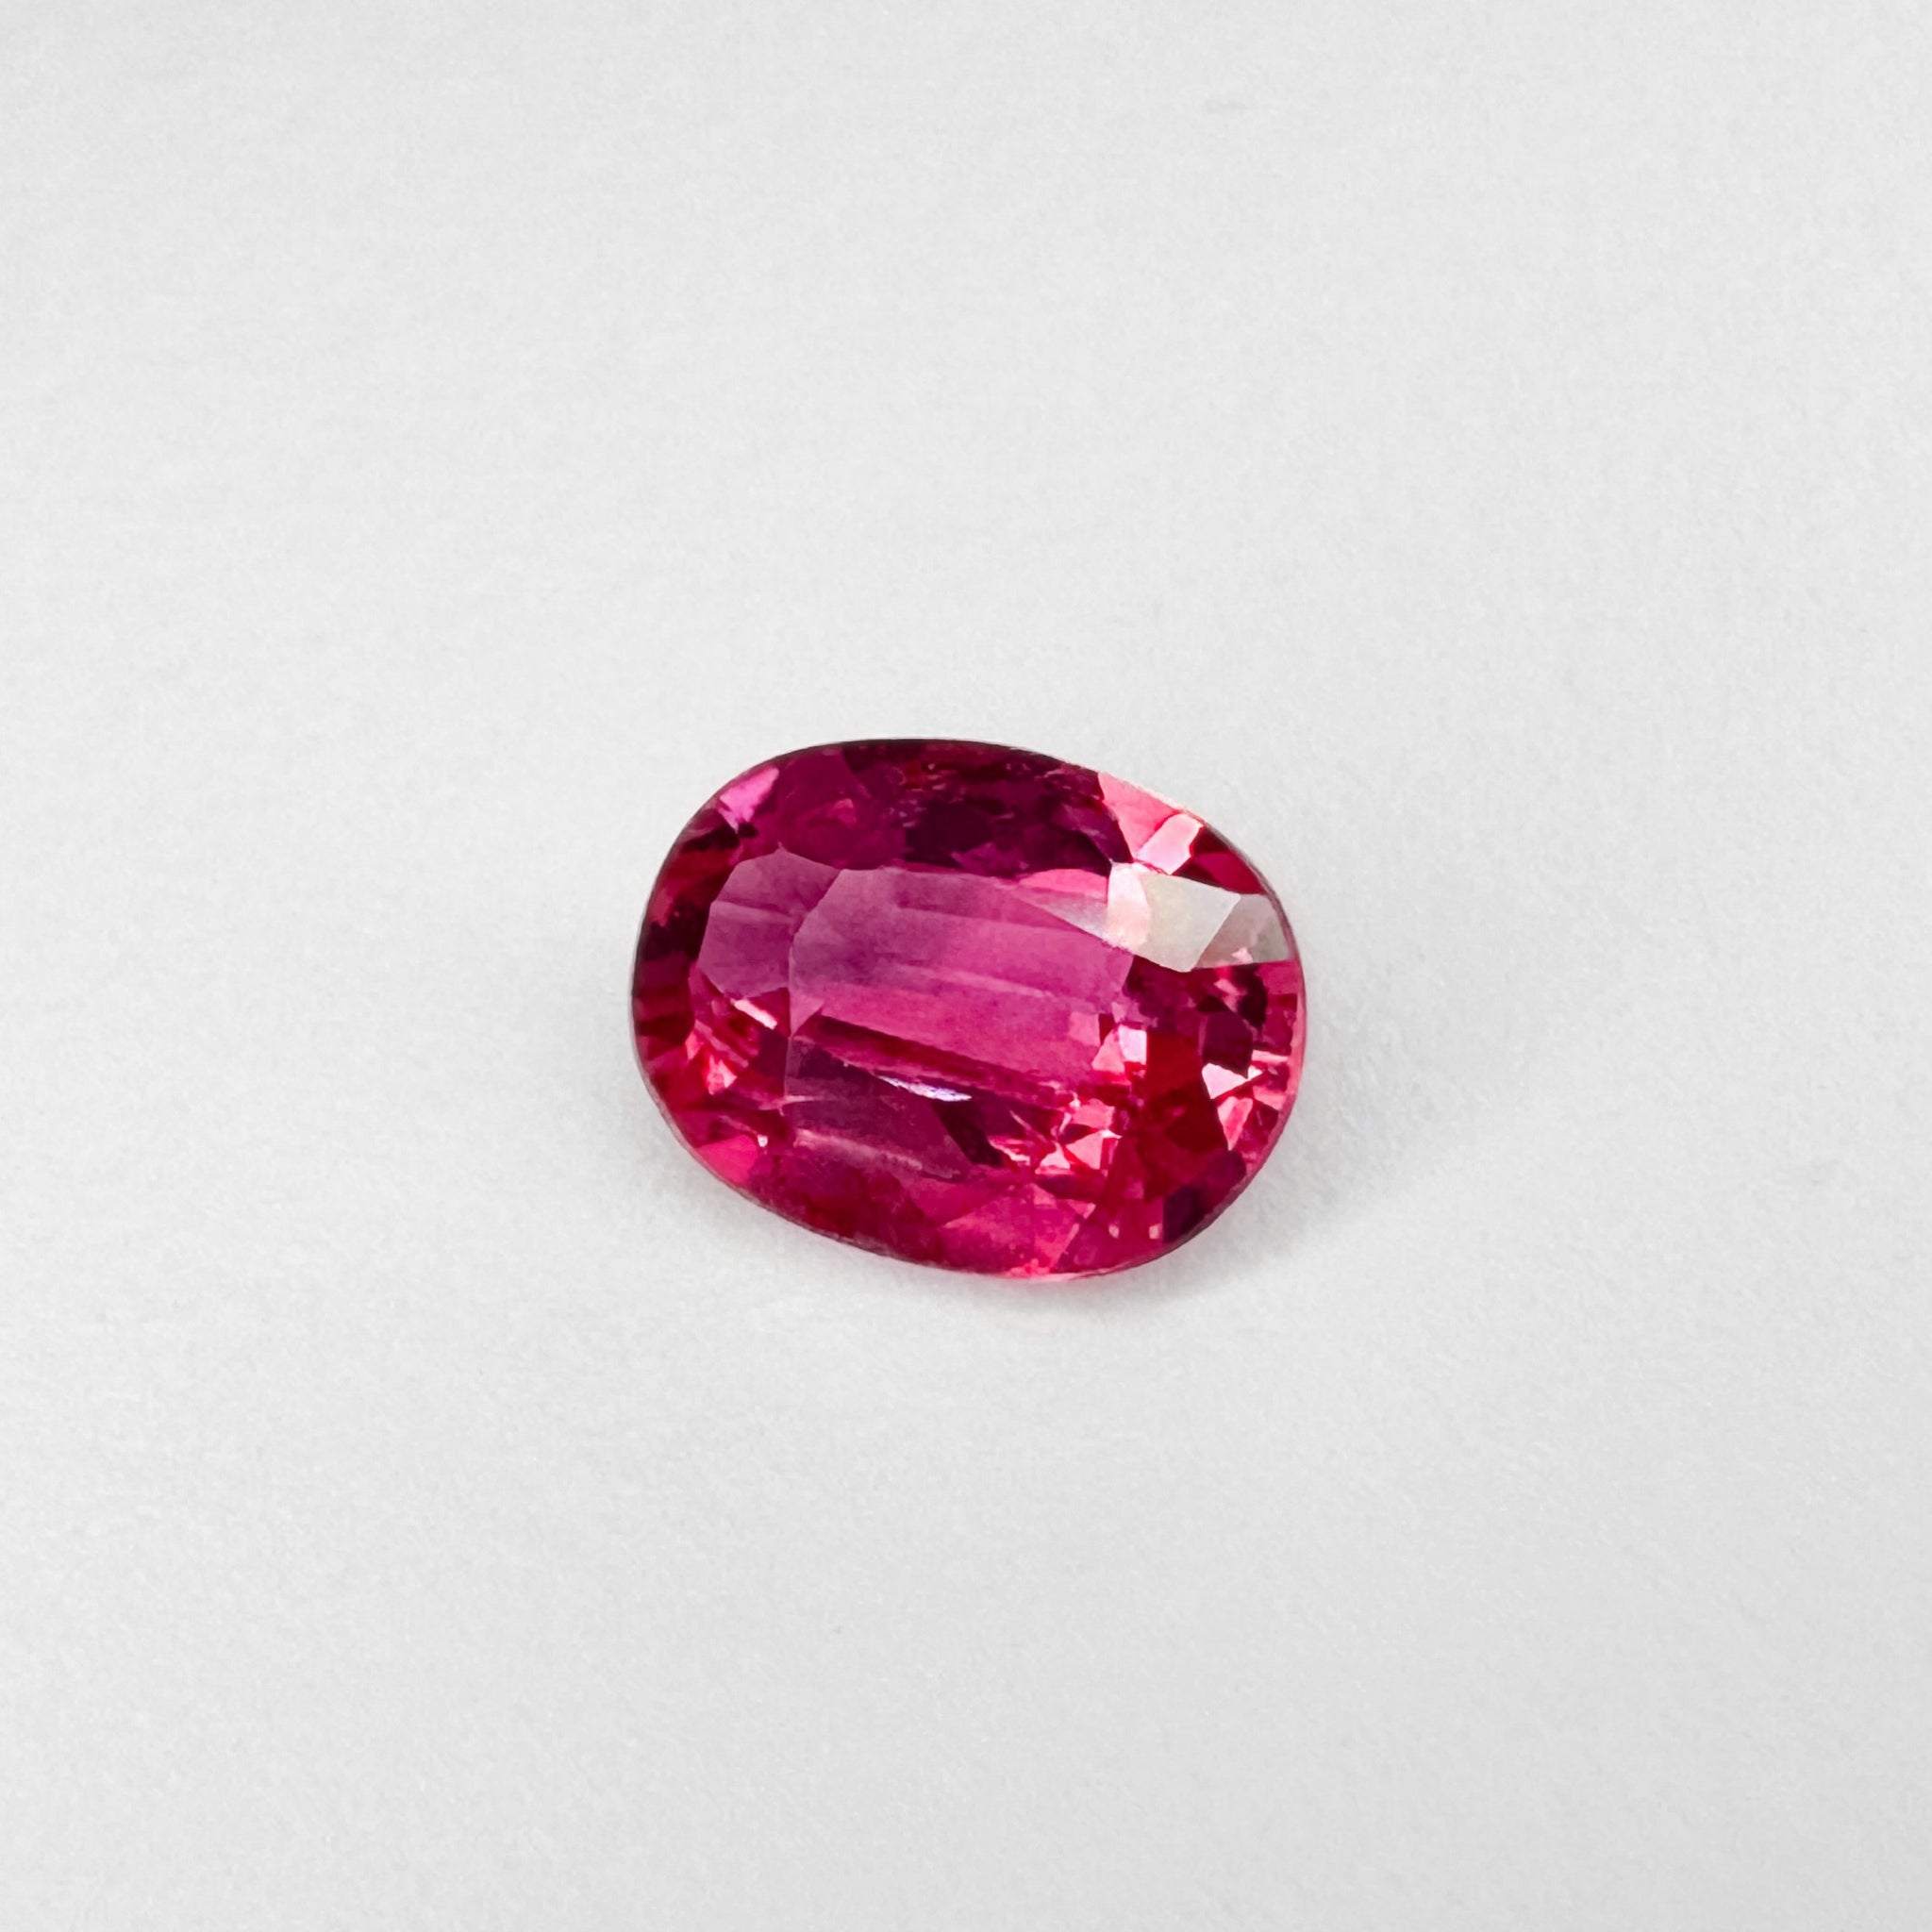 Untreated Ruby 0.627 ct